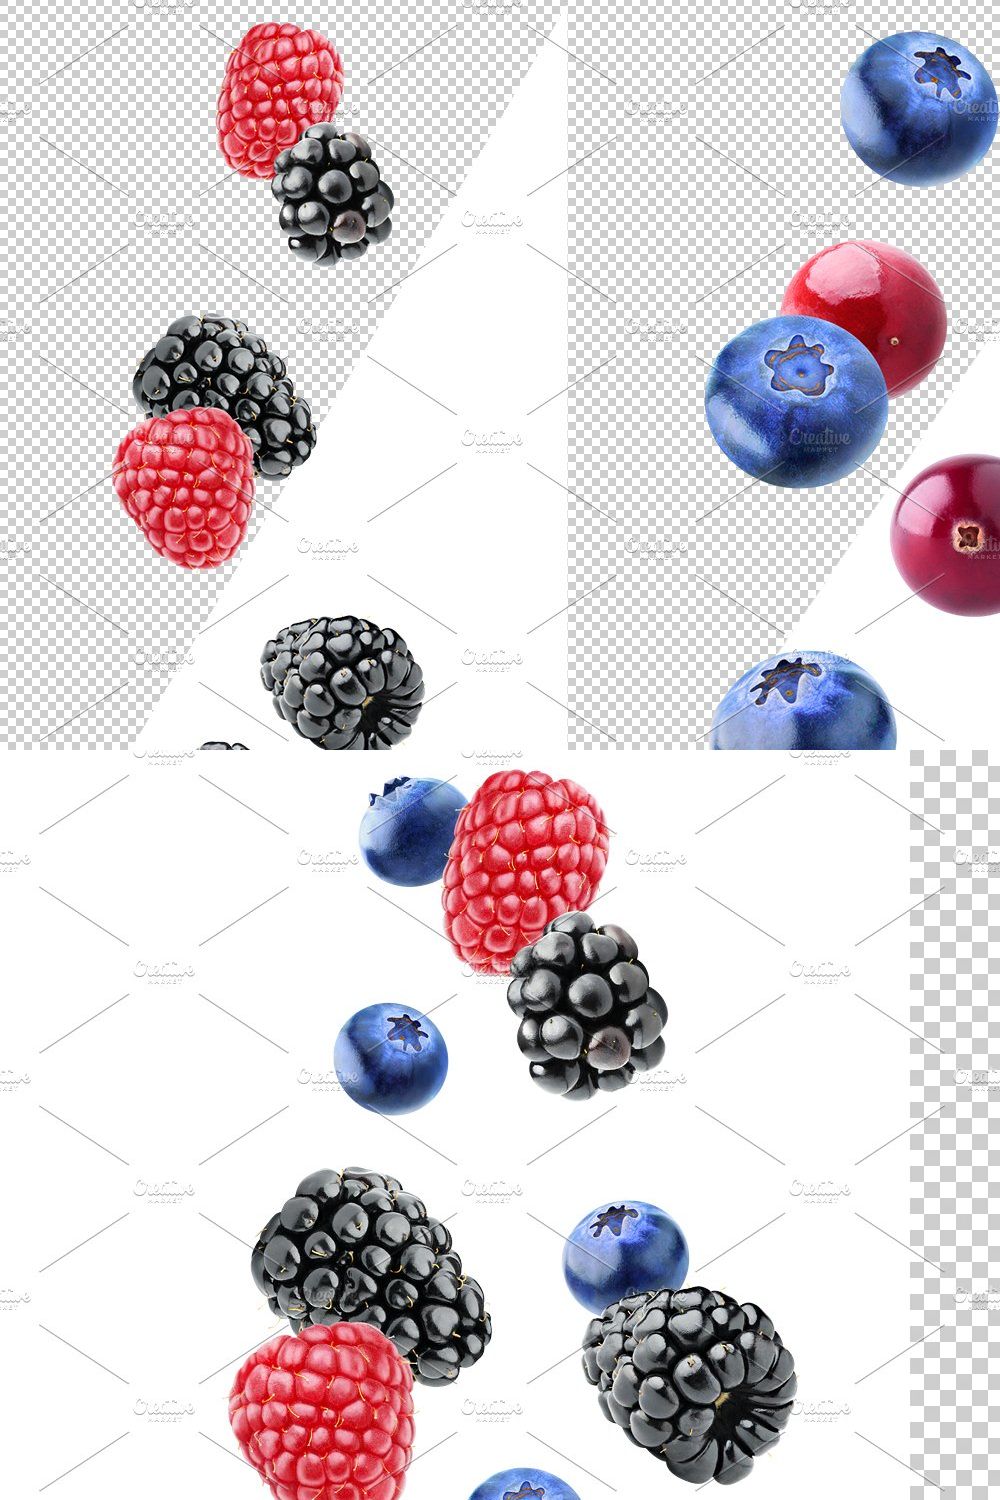 Berries in the air pinterest preview image.